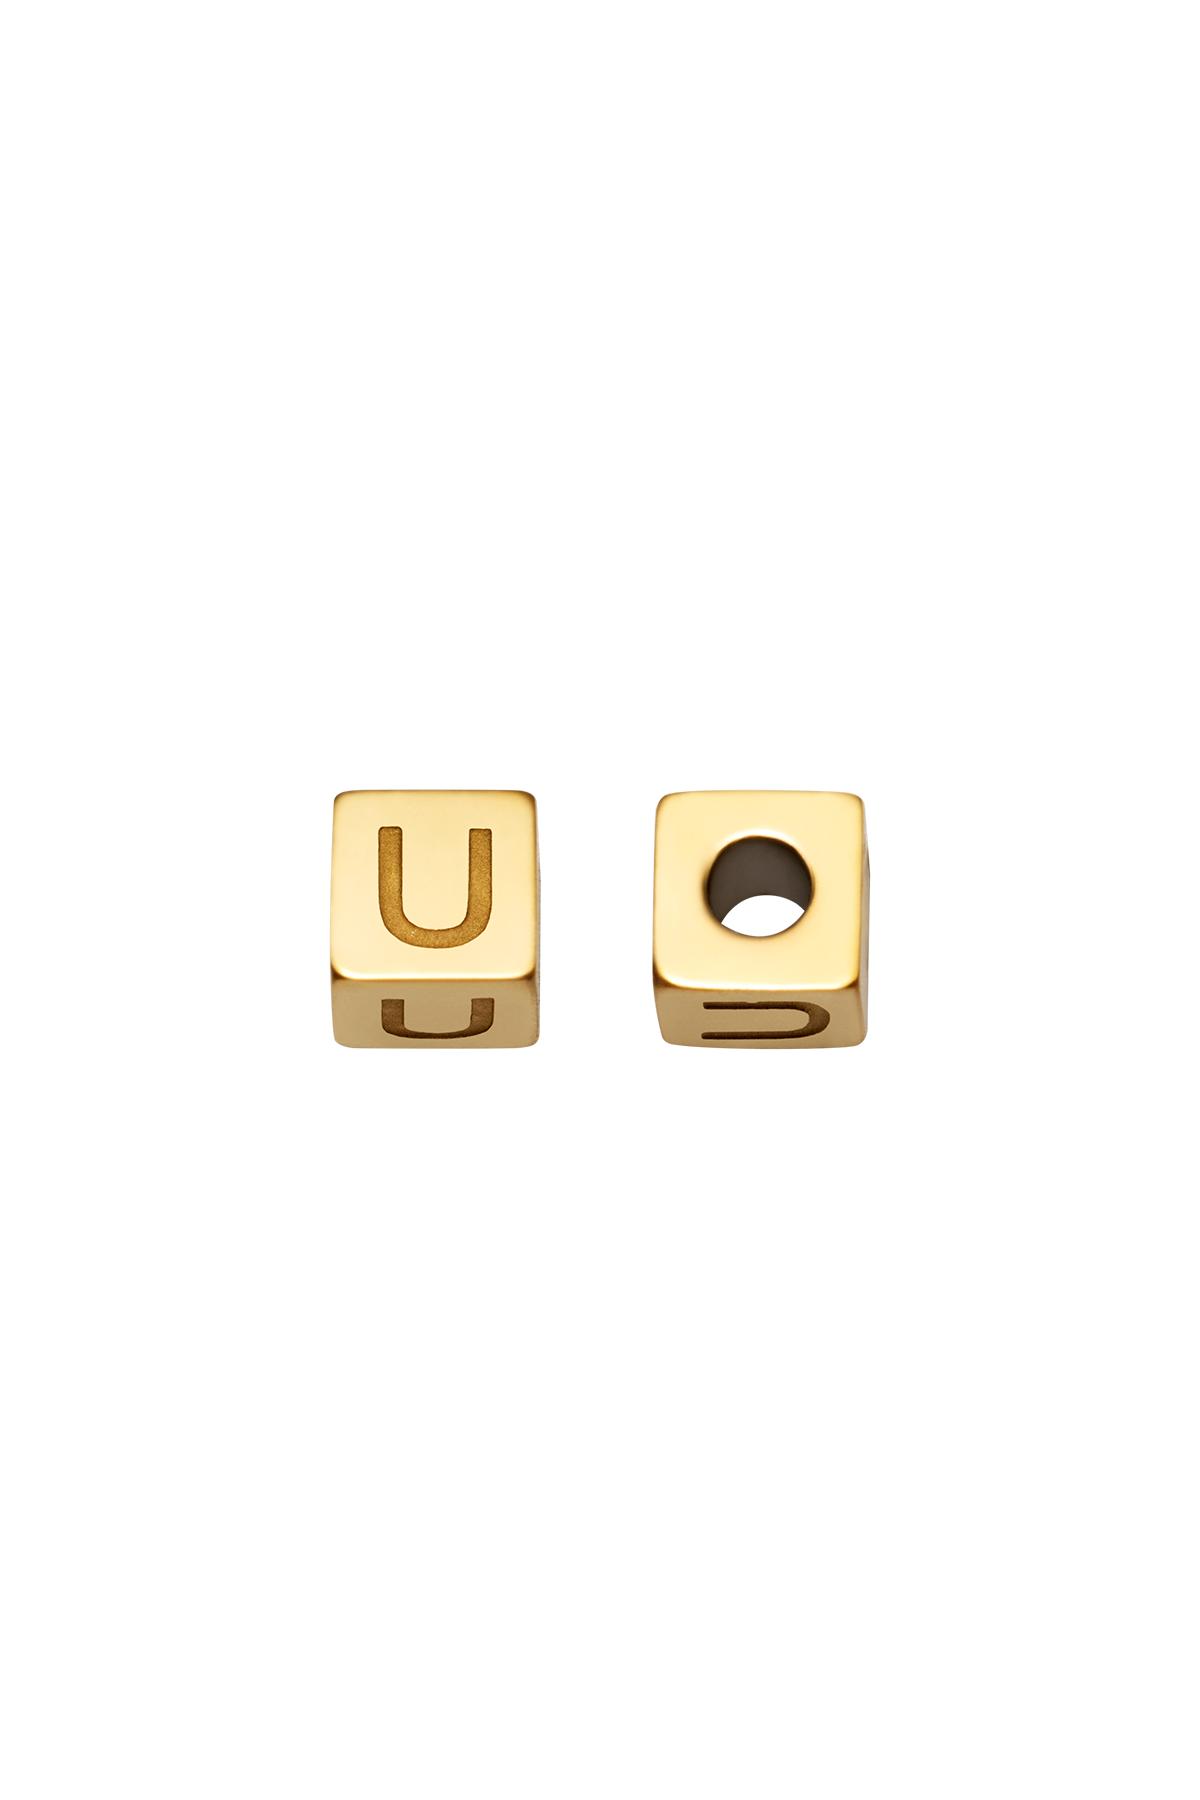 Gold / DIY Beads Alphabet Gold U Stainless Steel Picture11